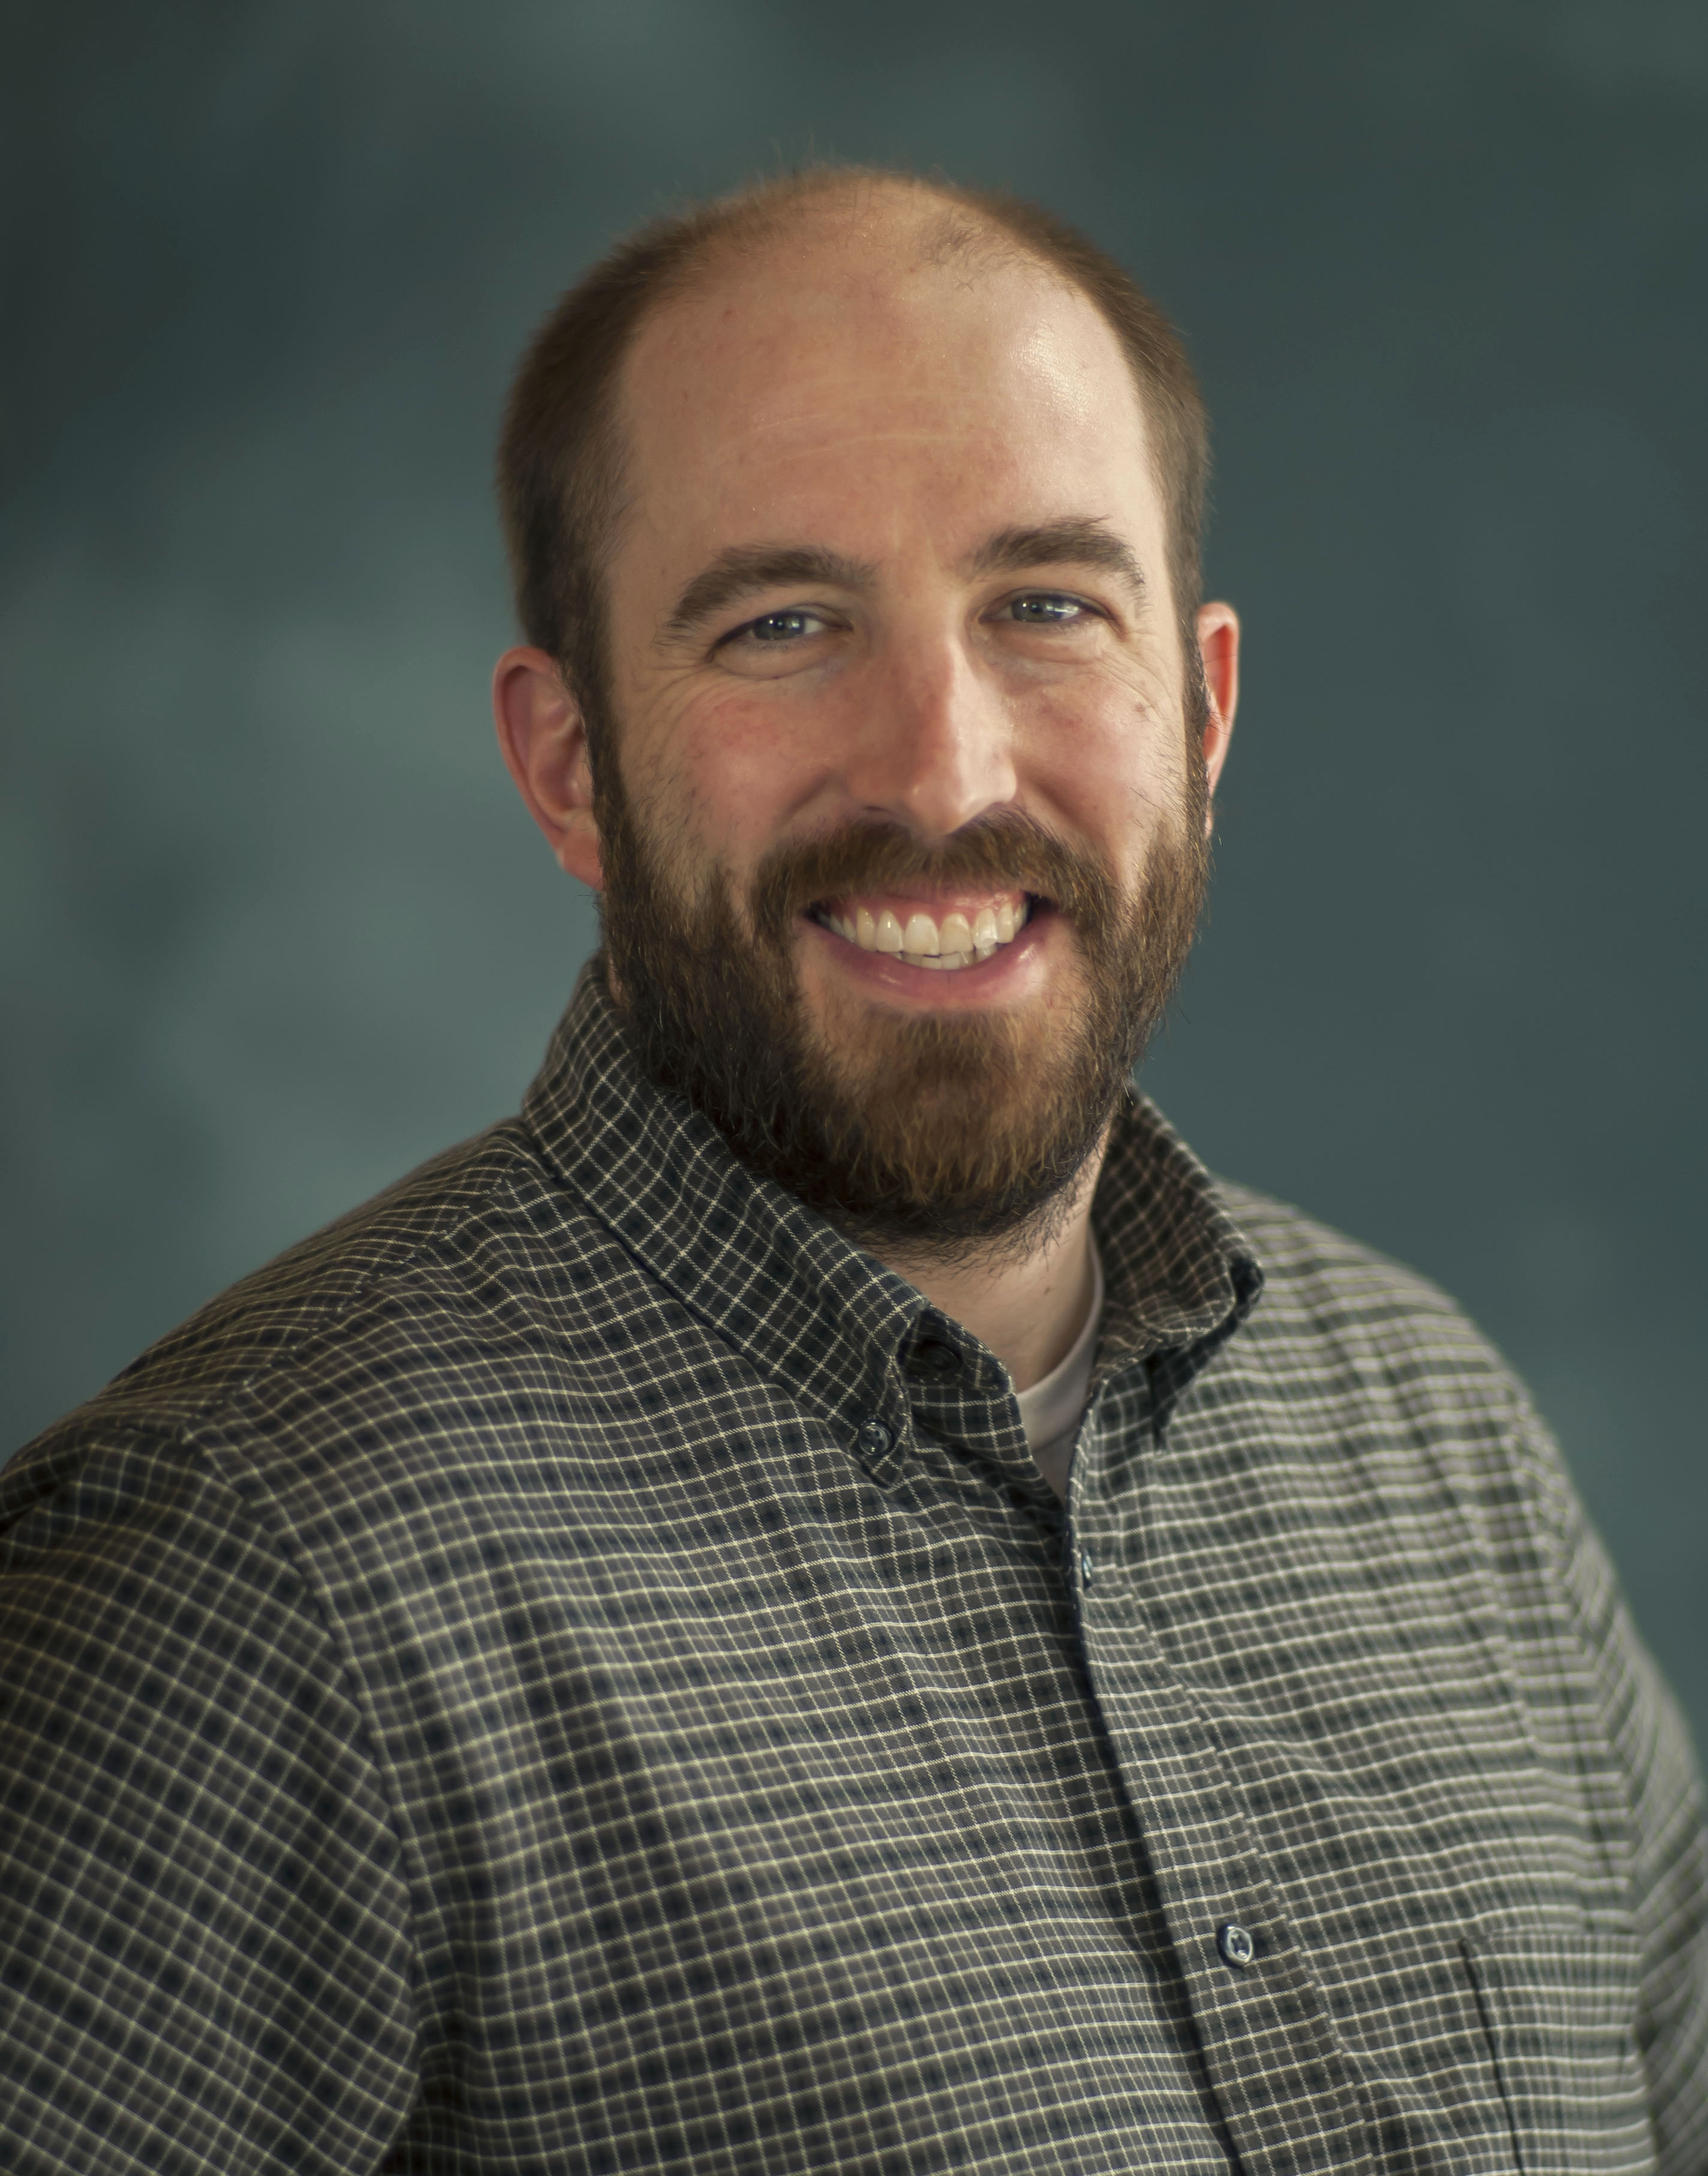 Dr. Thomas Stone is an assistant professor of mathematics and physics at Husson University’s College of Science and Humanities.